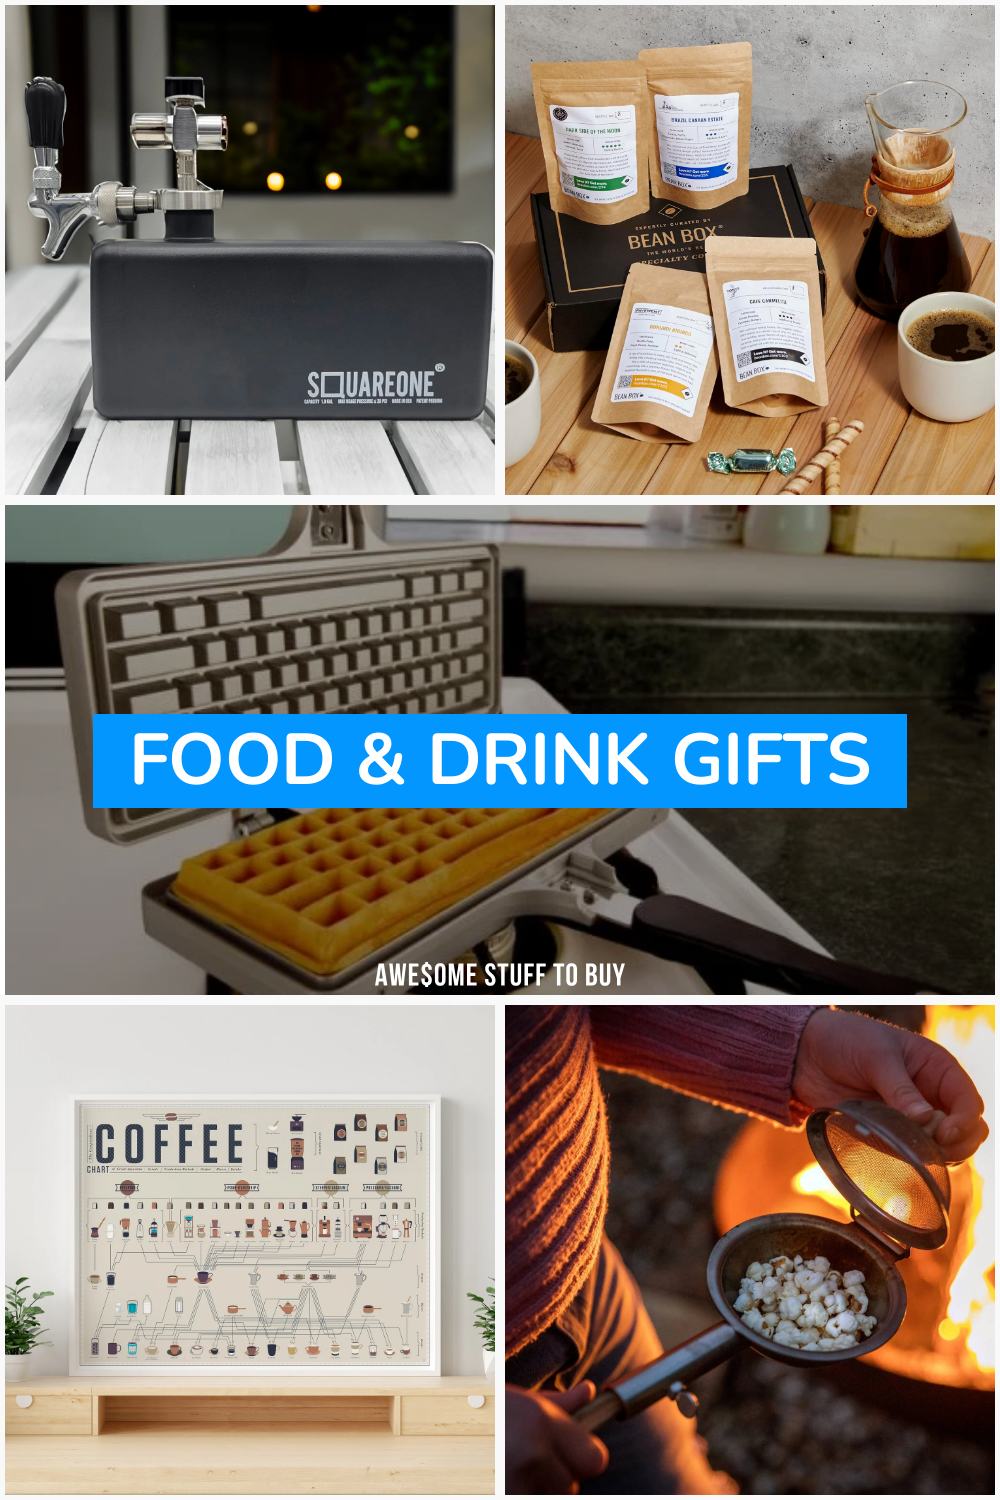 Food & Drink Gifts // Awesome Stuff to Buy